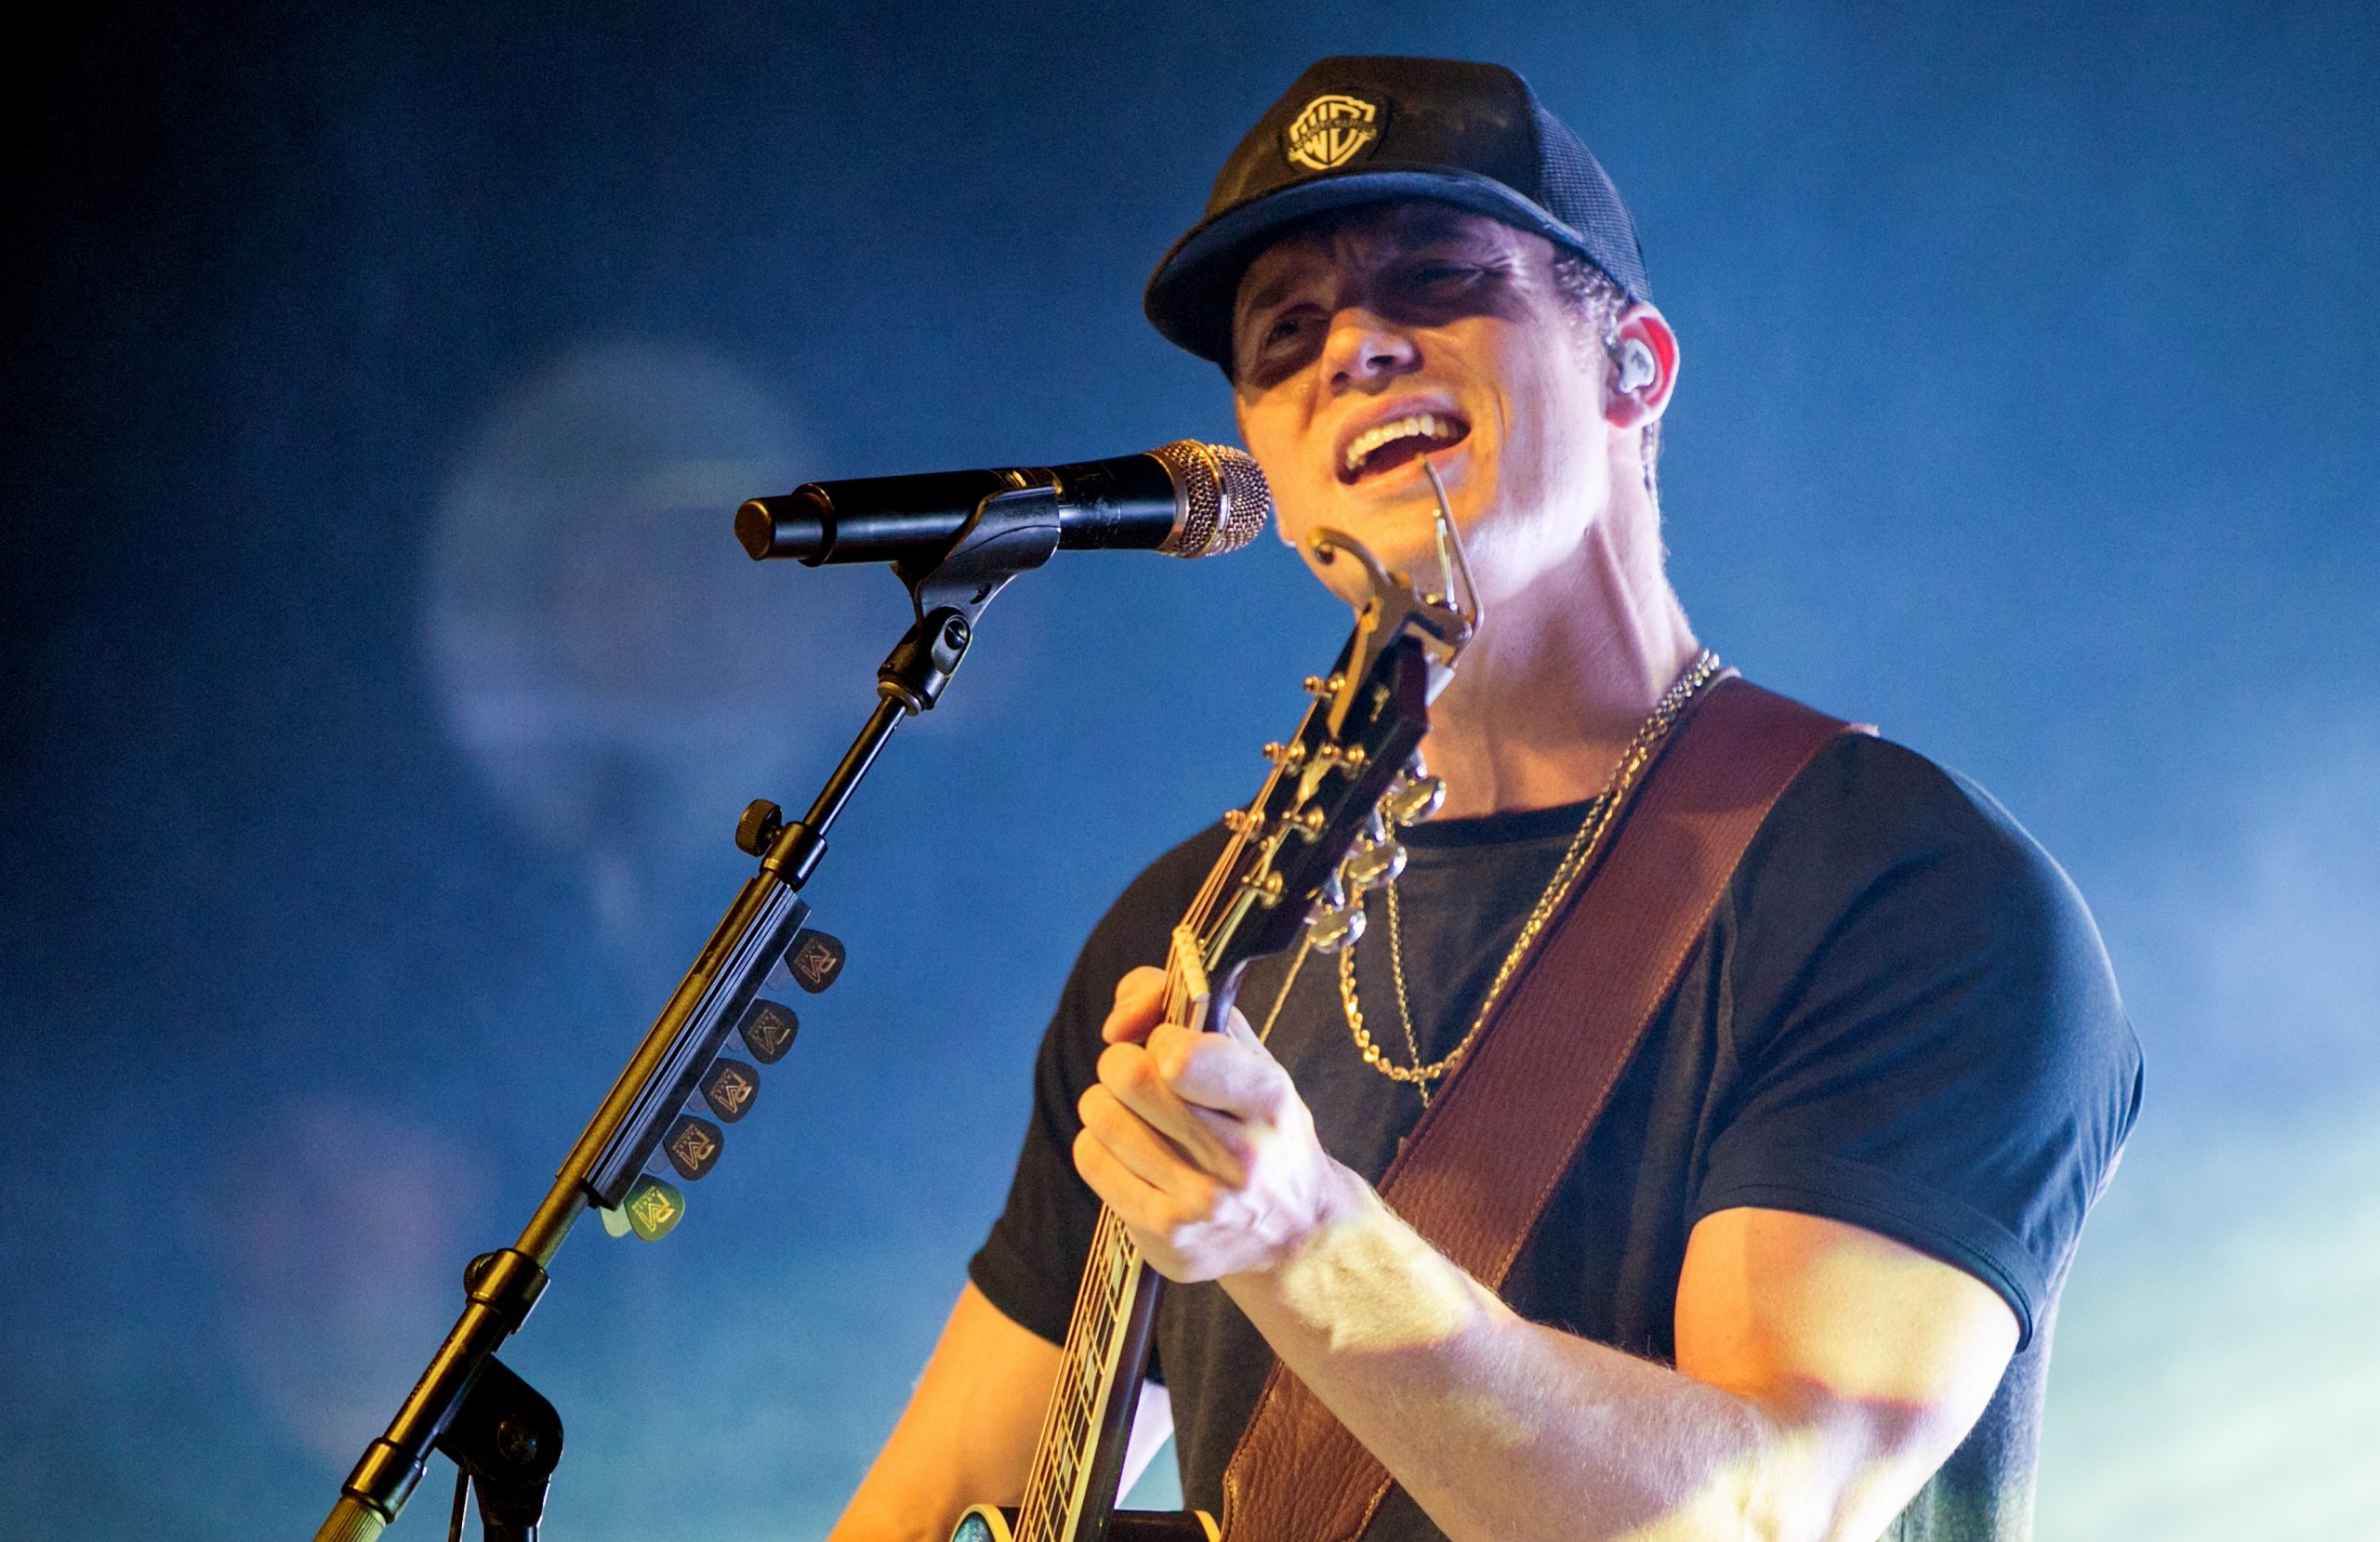 Parker McCollum Rocks 20,000 Fans in ‘Falling Apart’ Live Video The